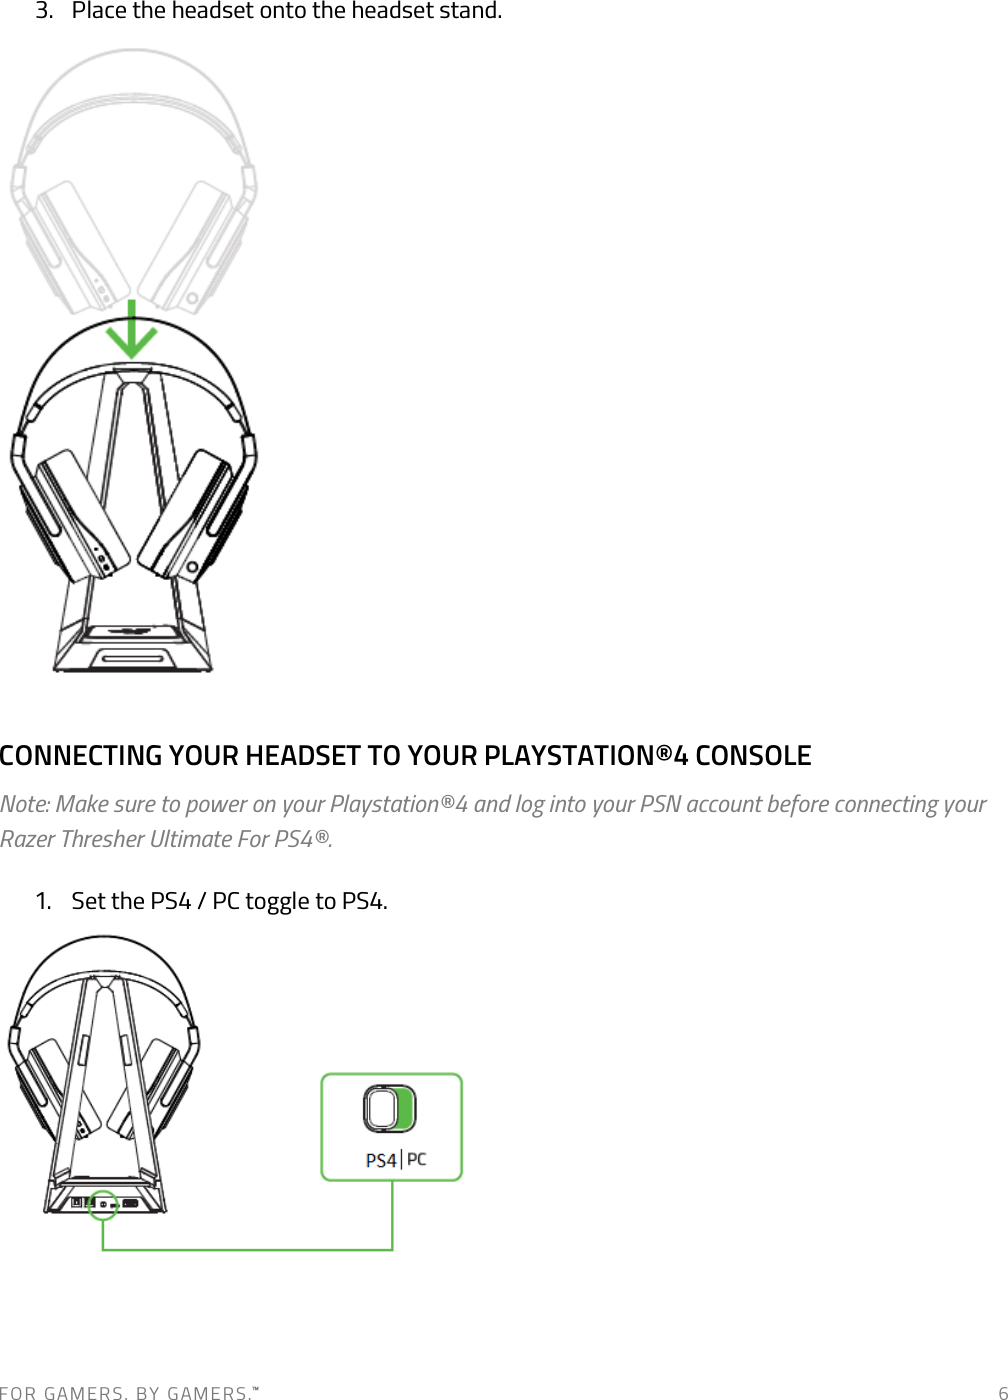 F O R   G A M E R S .   B Y   G AM E R S .™   6 3. Place the headset onto the headset stand.  CONNECTING YOUR HEADSET TO YOUR PLAYSTATION®4 CONSOLE Note: Make sure to power on your Playstation®4 and log into your PSN account before connecting your Razer Thresher Ultimate For PS4®. 1. Set the PS4 / PC toggle to PS4.  